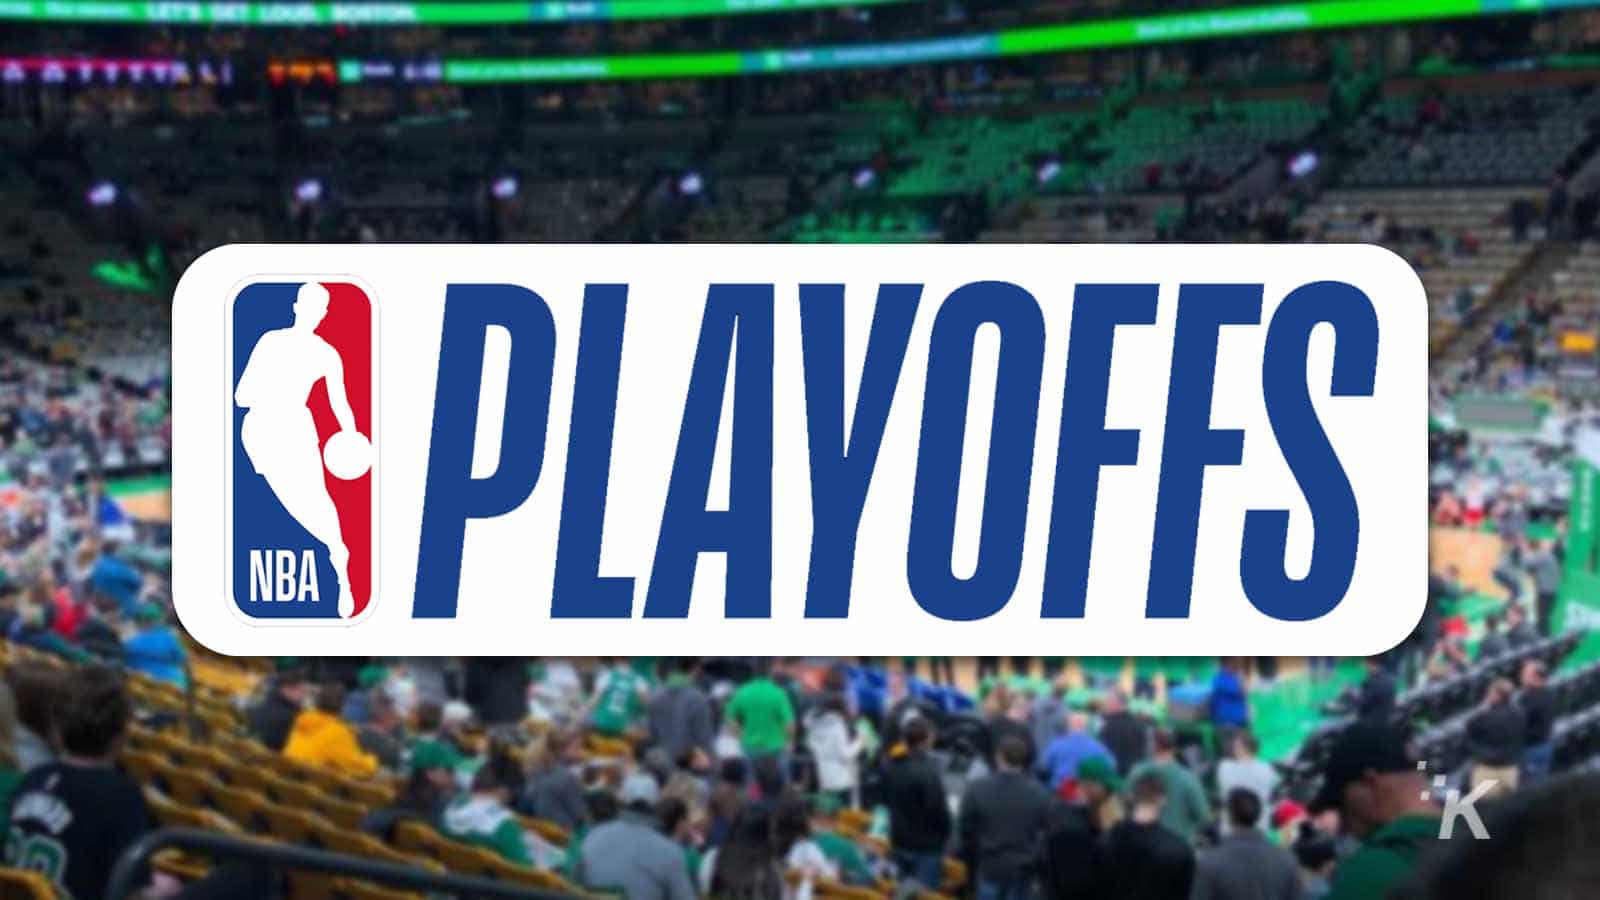 How To Stream The Nba Playoffs Without Cable